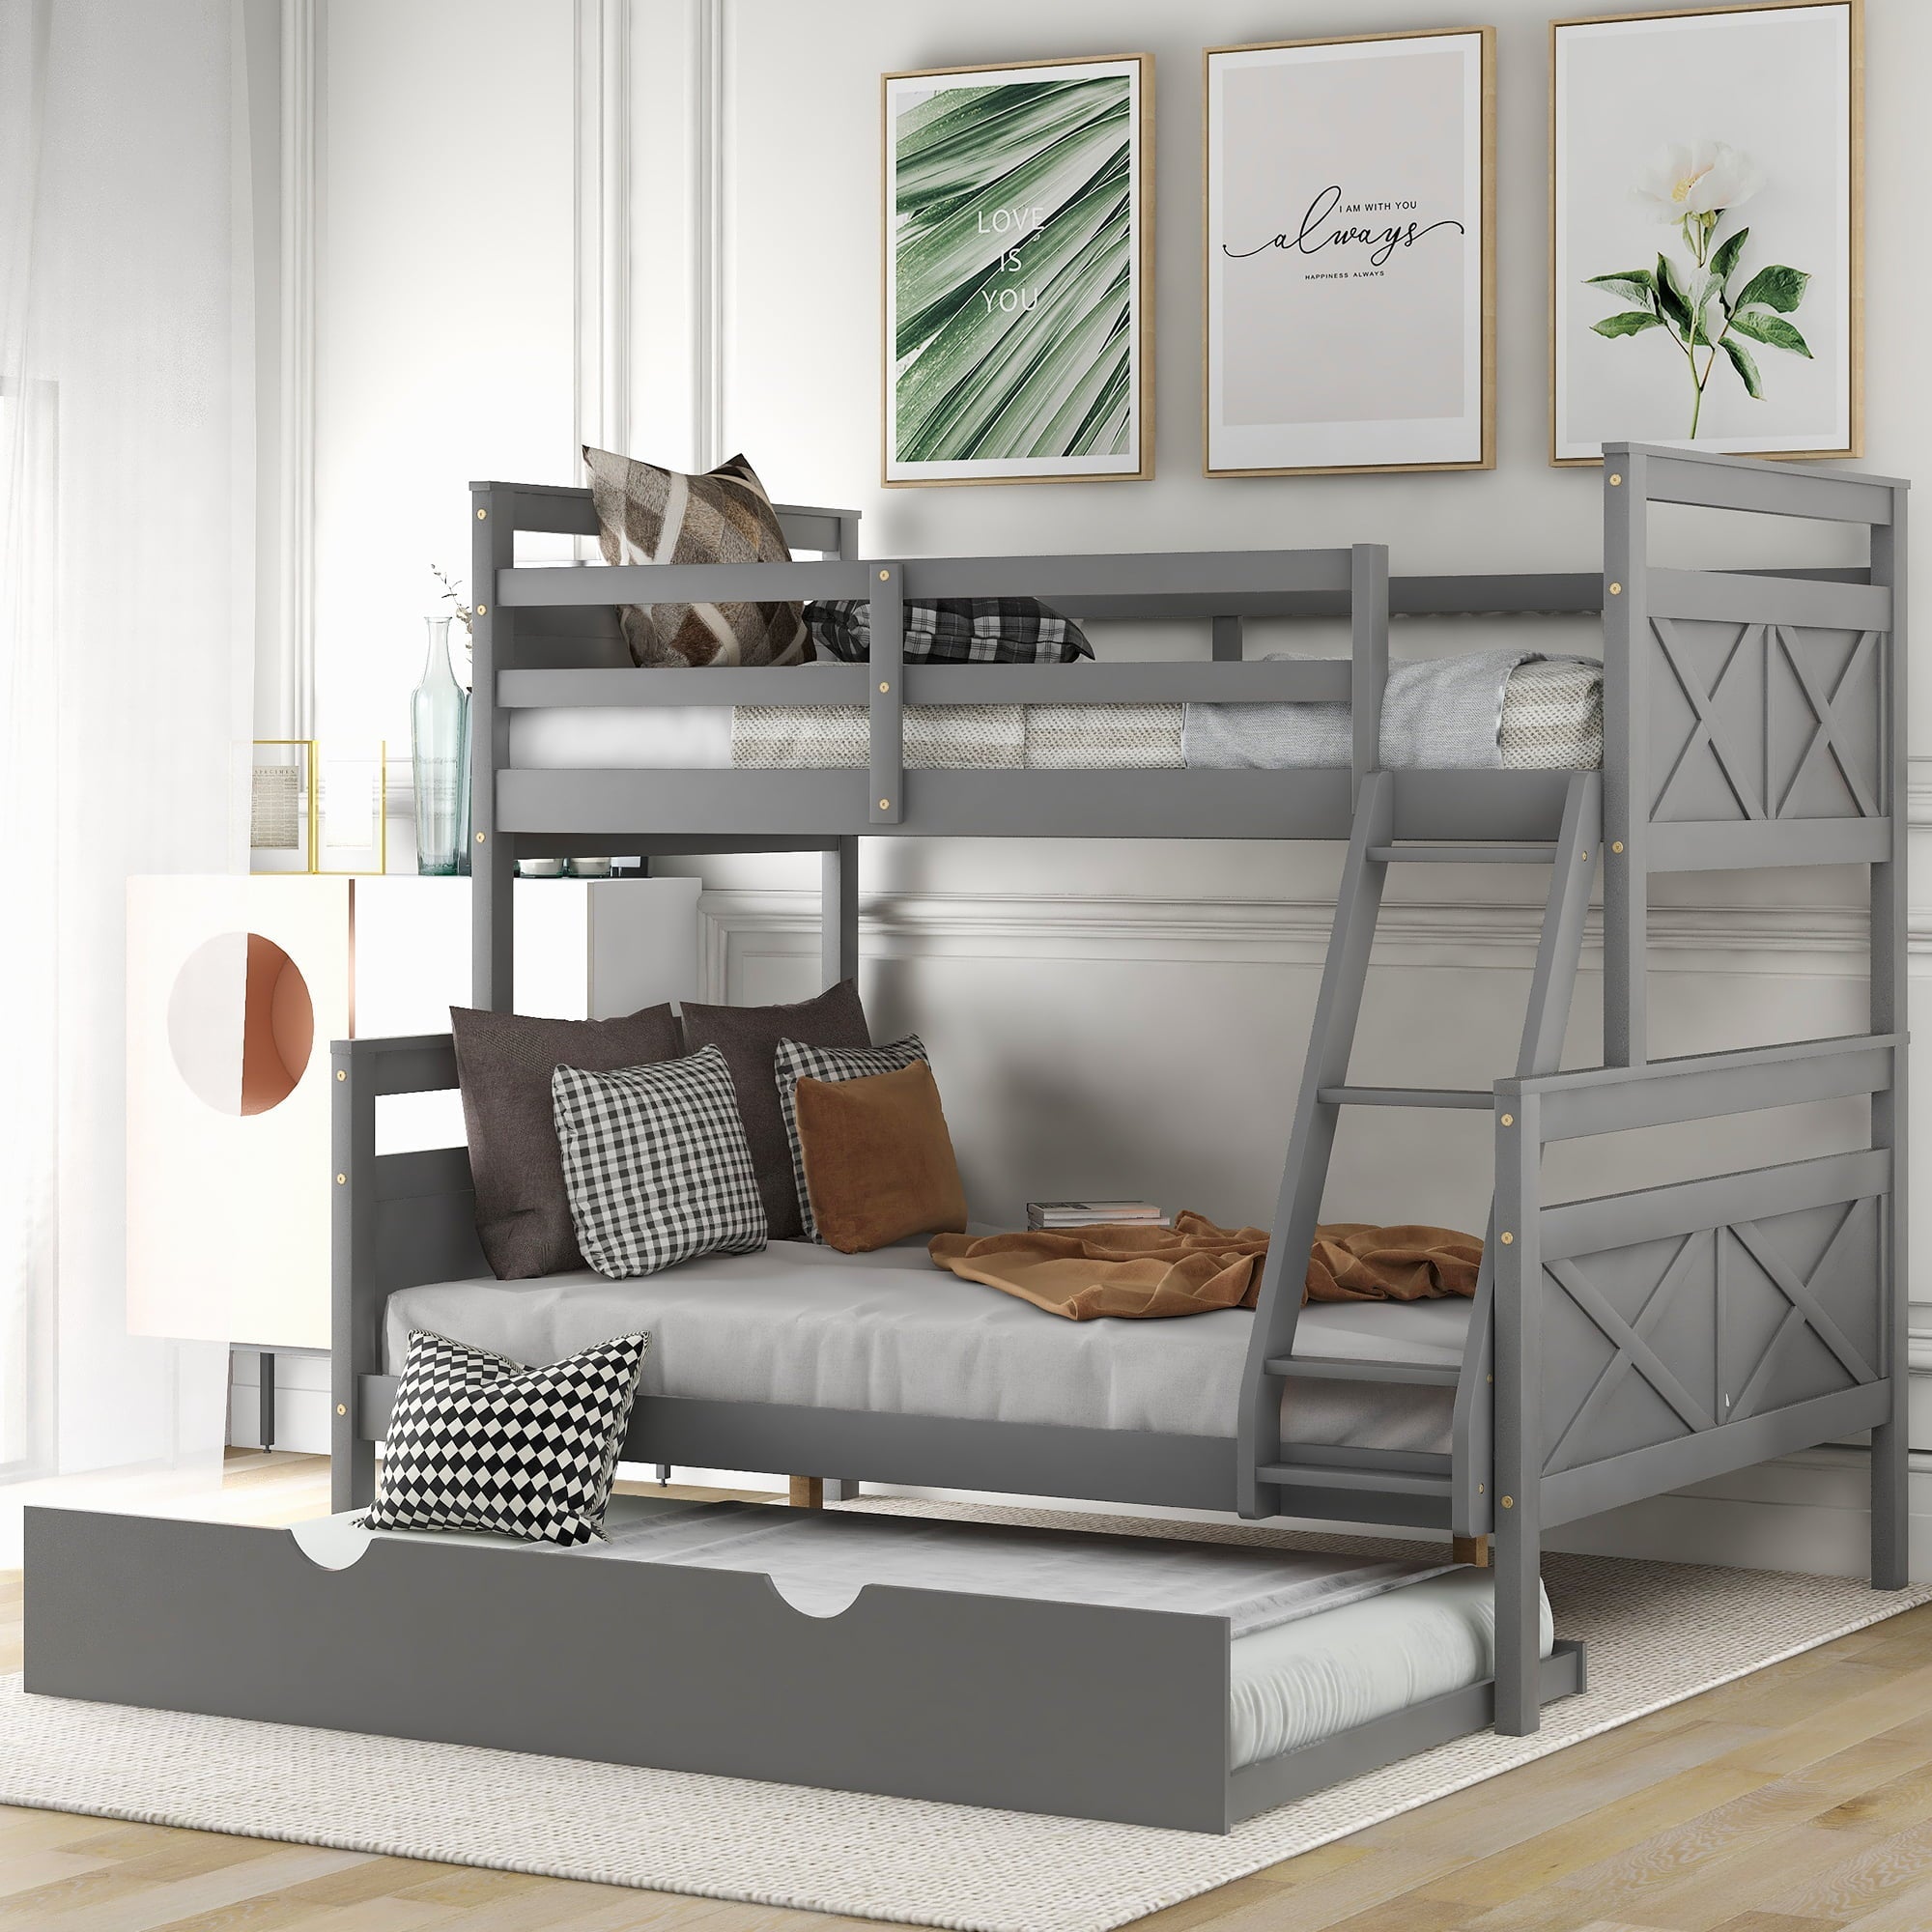 Euroco Wood Twin over Full Bunk Bed with Trundle for Kids & Adults Bedroom, Gray